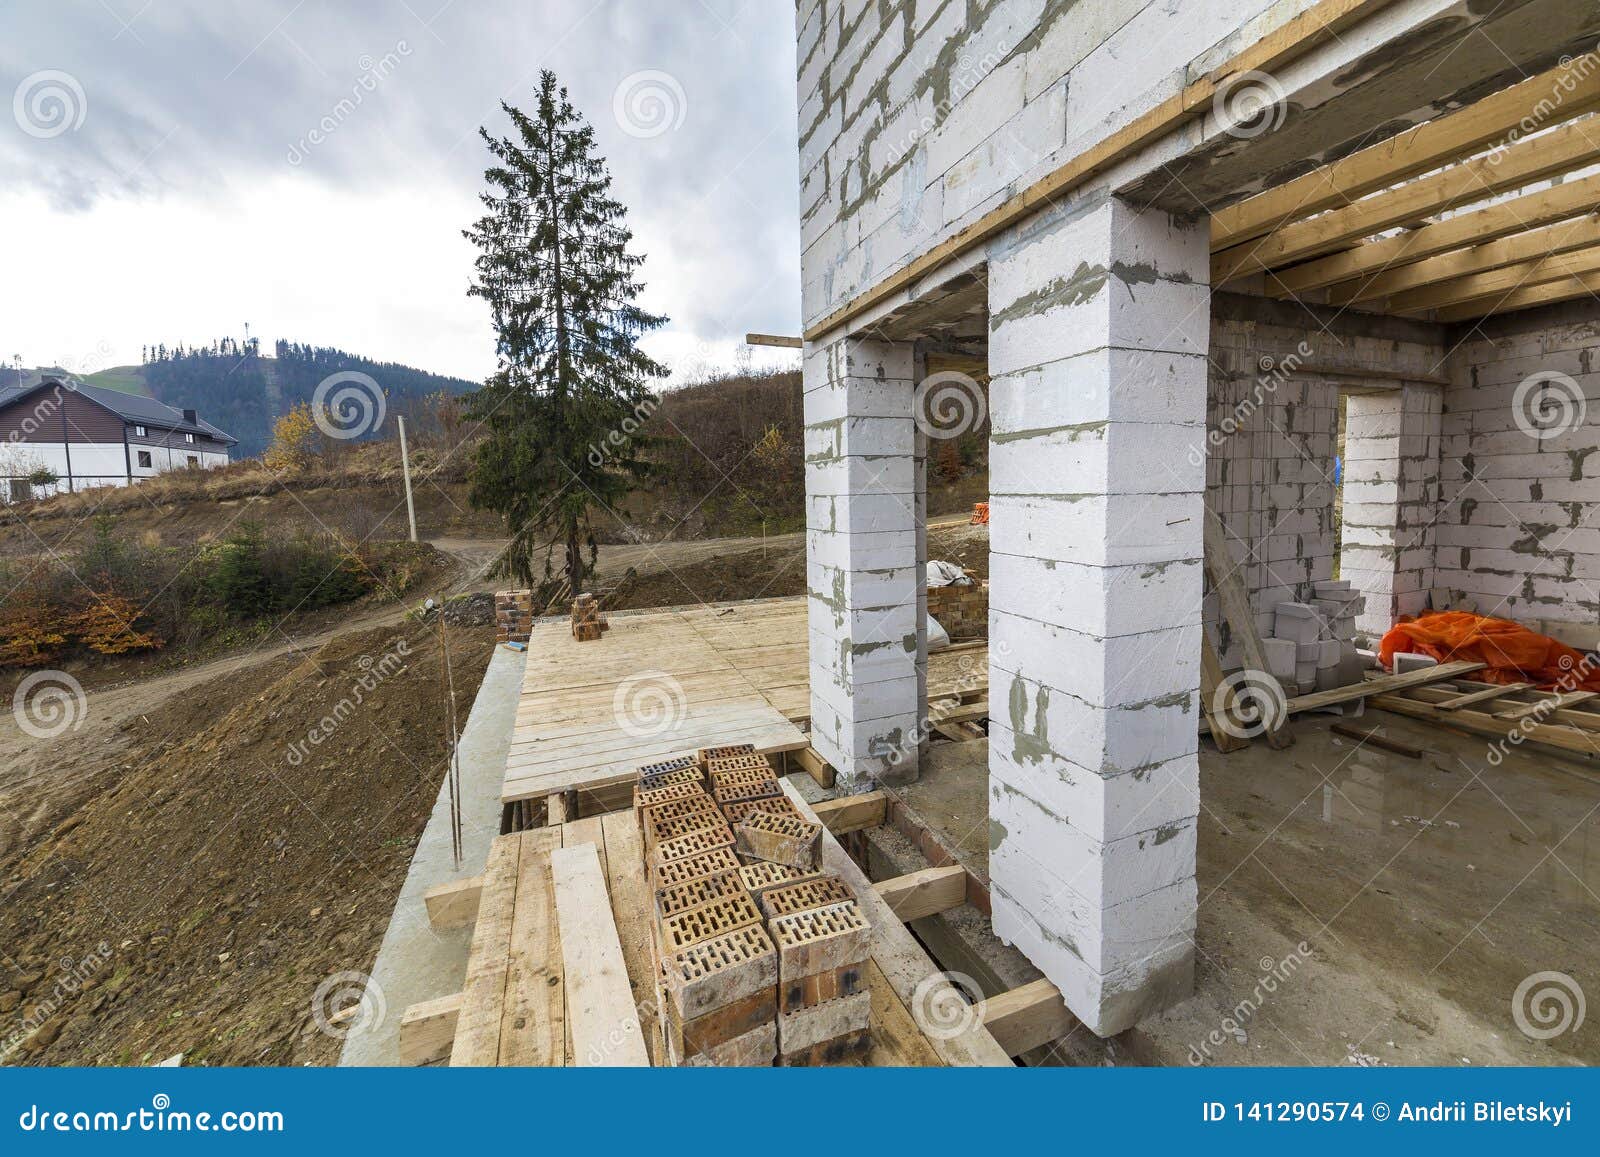 House Building Under Construction Basement Detail With Walls Made